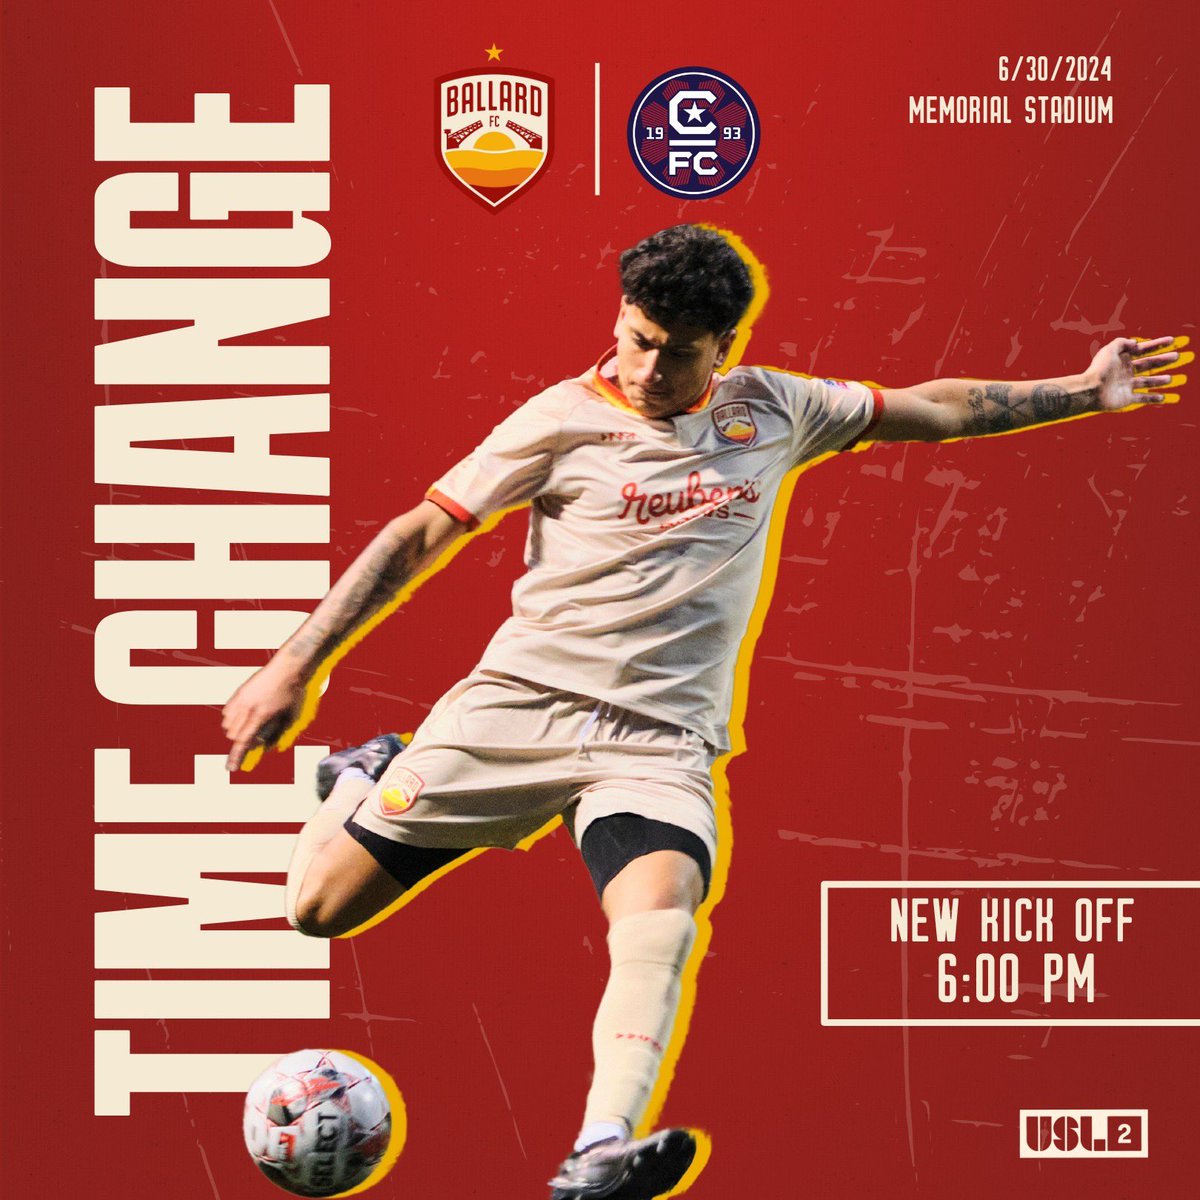 🚨 Time change! Our kickoff time for our match on June 30th against @cfcatletico will now be at 6:00pm!

With Seattle PrideFest happening at Seattle Center that day, we are working with organizers to ensure the events do not overlap and everyone on campus has a great experience.